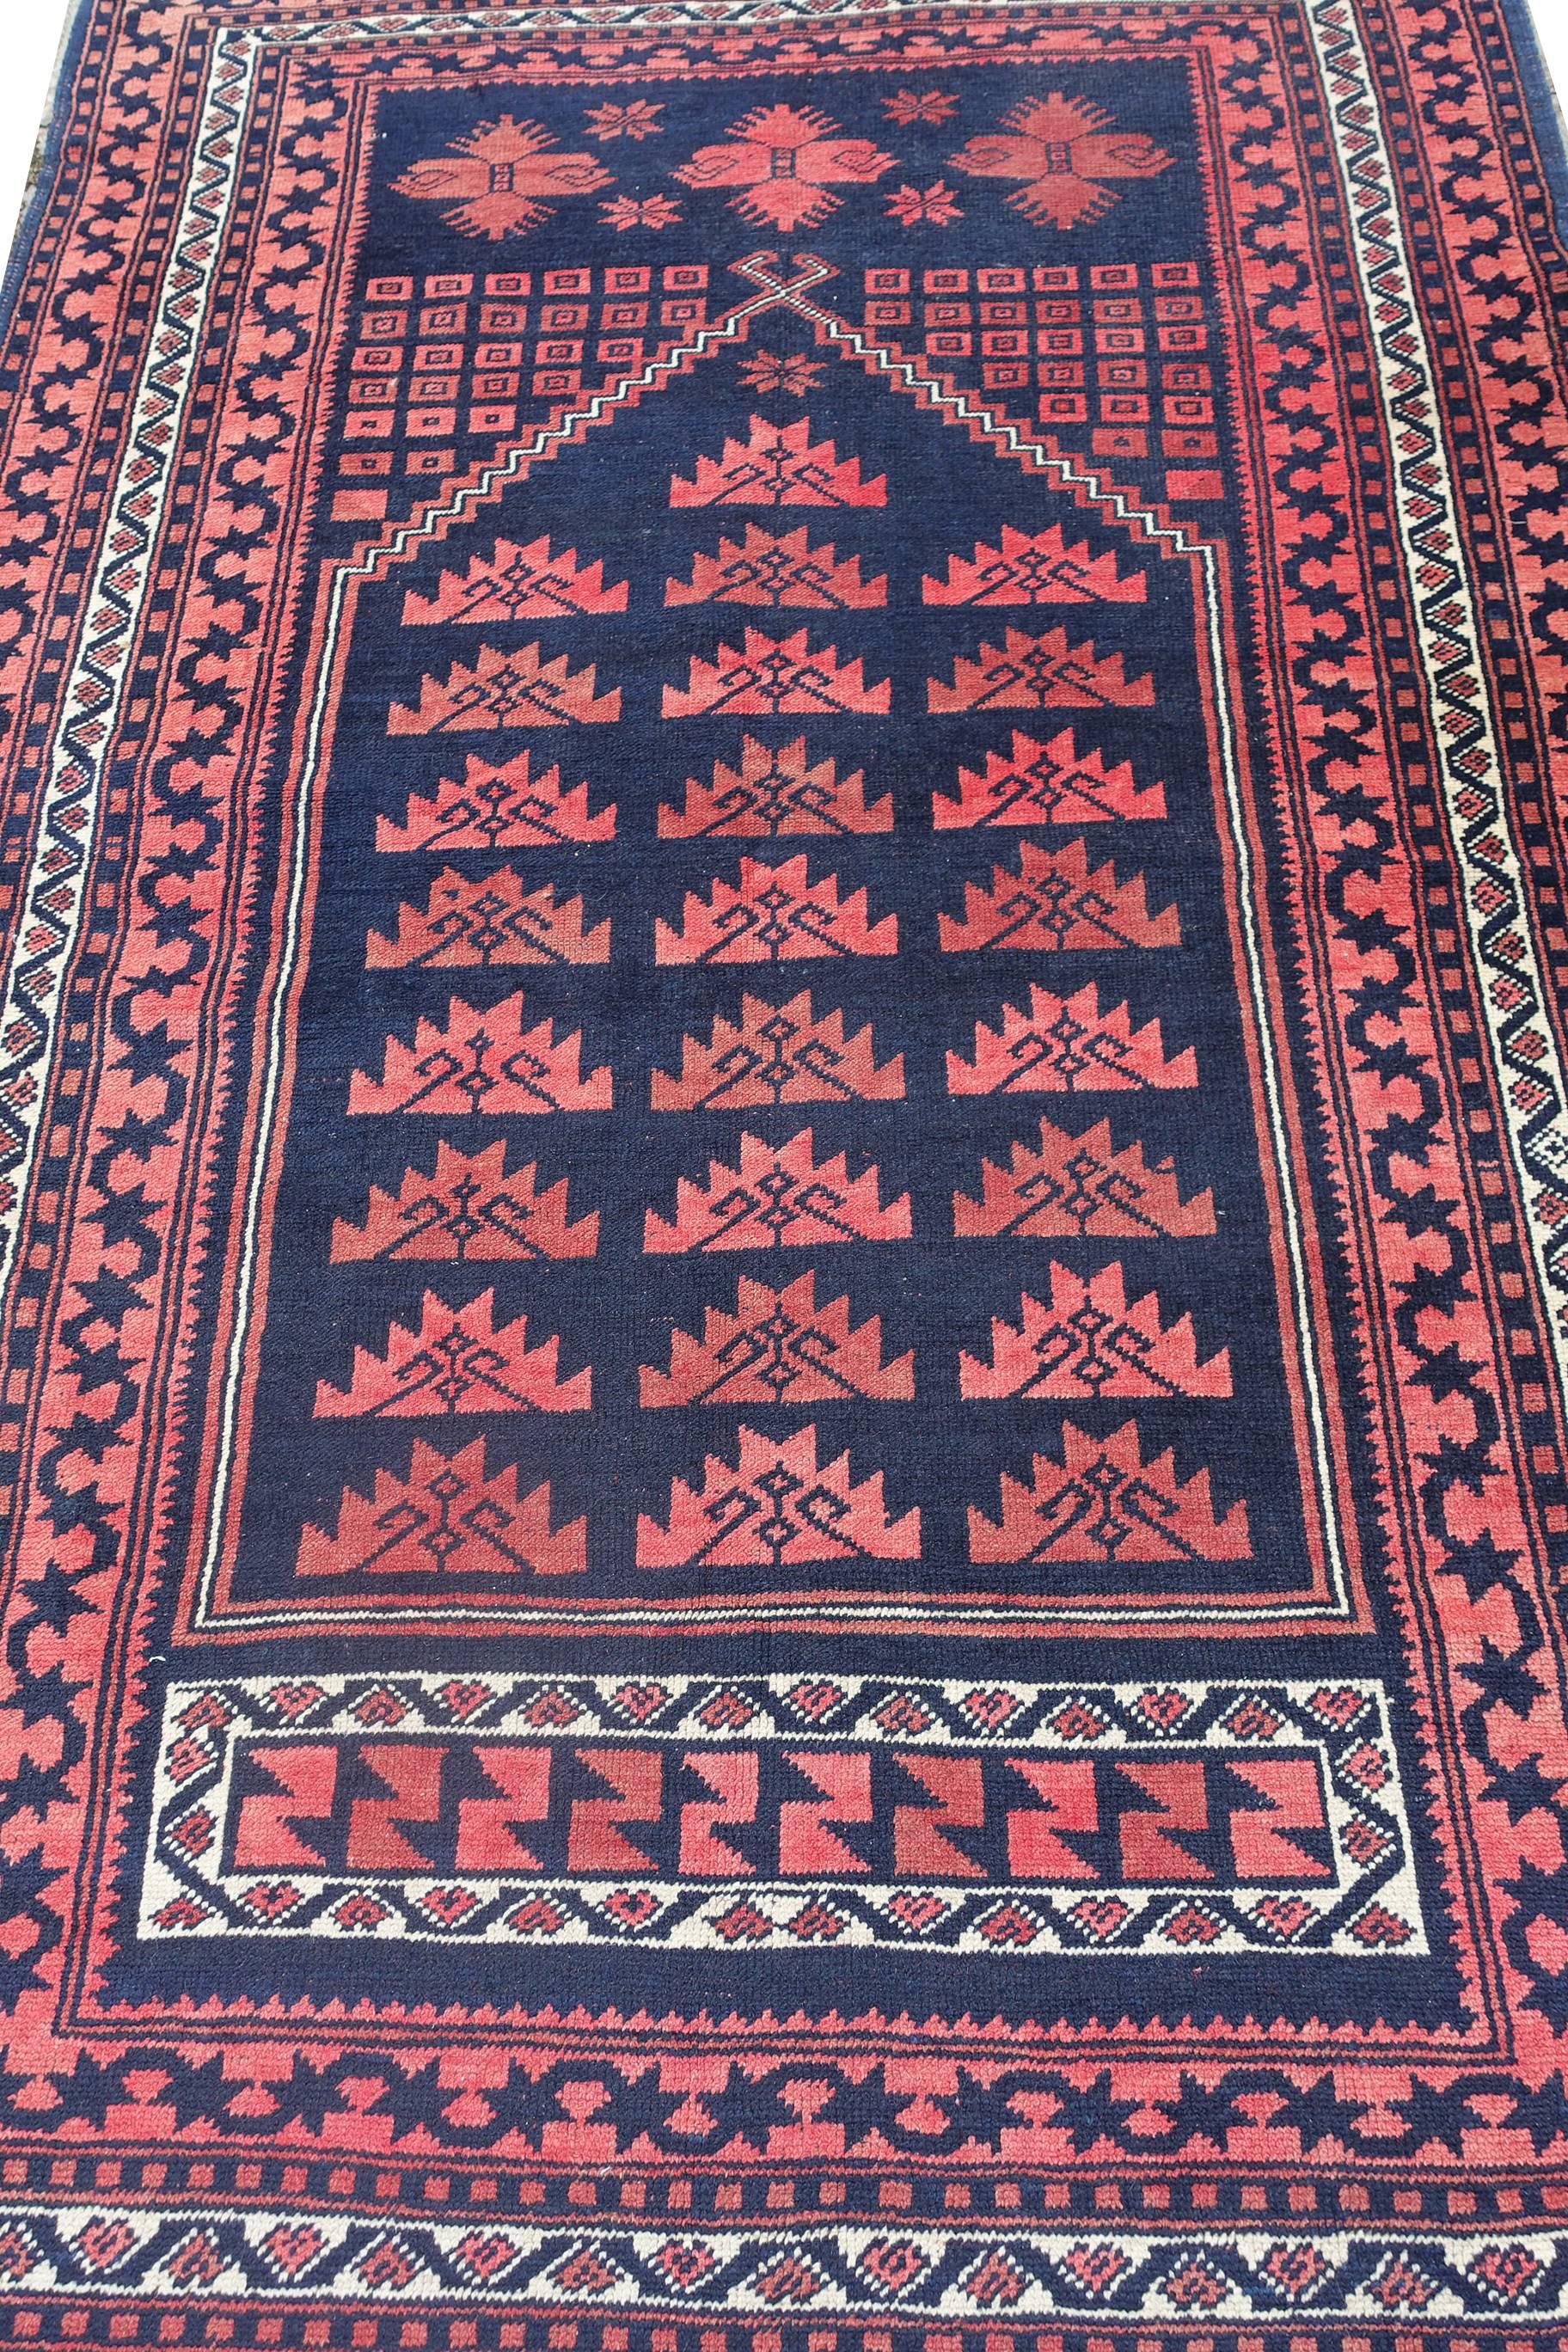 Large 'Prayer Rug Design' rug from Turkey (Balikesir/Yagcibedir), circa 1980. Measures: 173 x 114 cm.

This unique hand-knotted carpet features the Classic prayer rug design with mihrab and the Ram’s Horns repeated in several row of purple göls